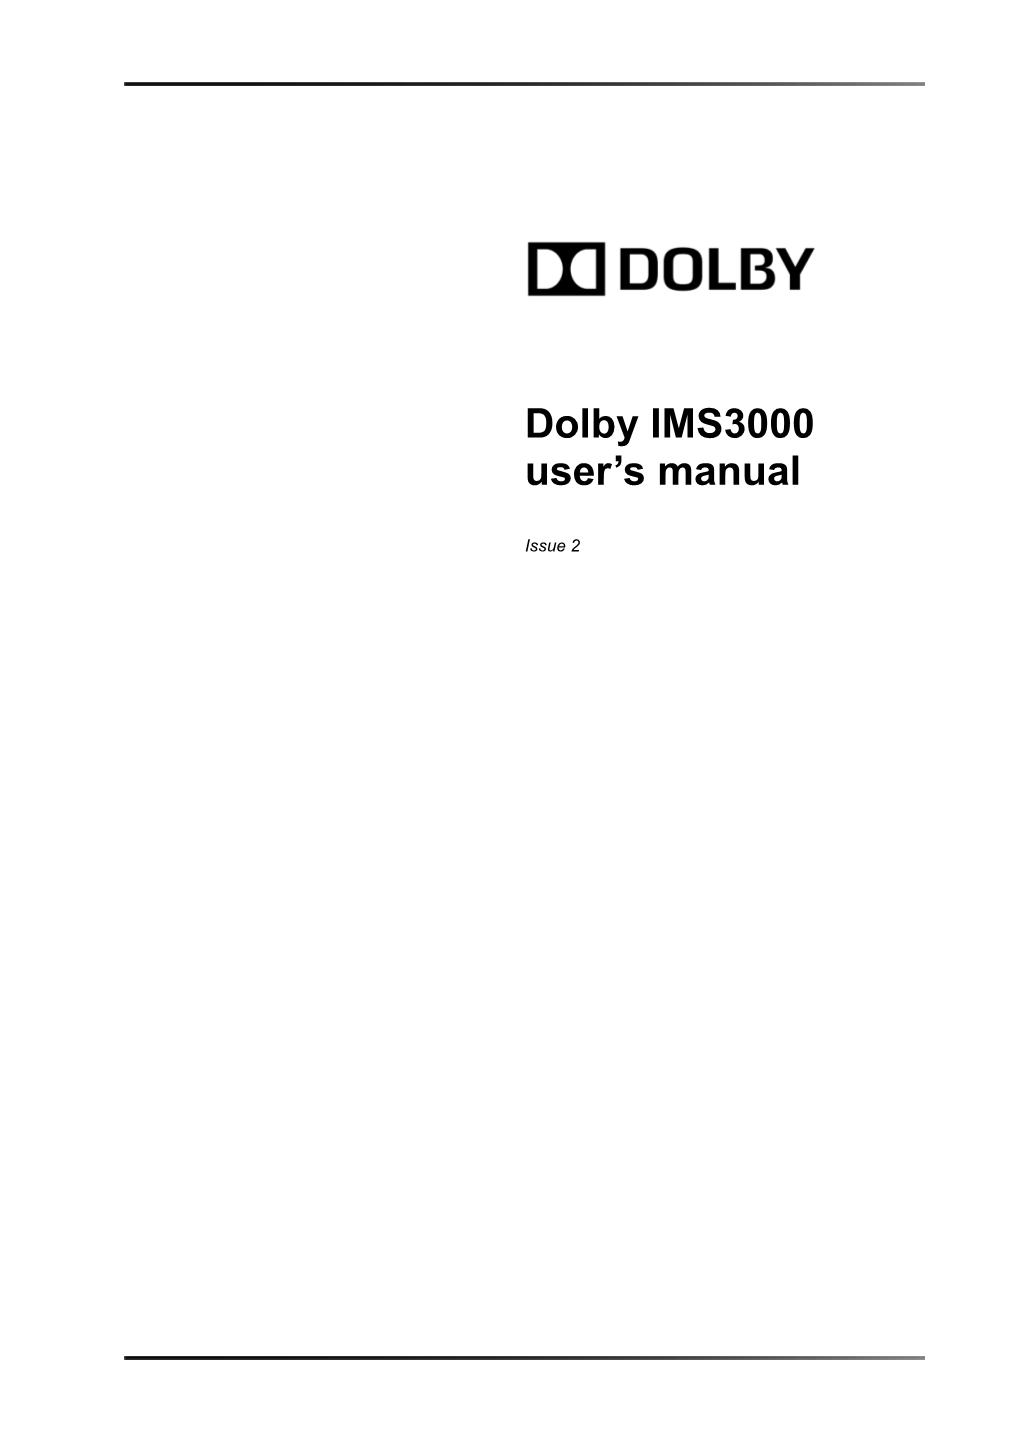 Dolby IMS3000 User's Manual